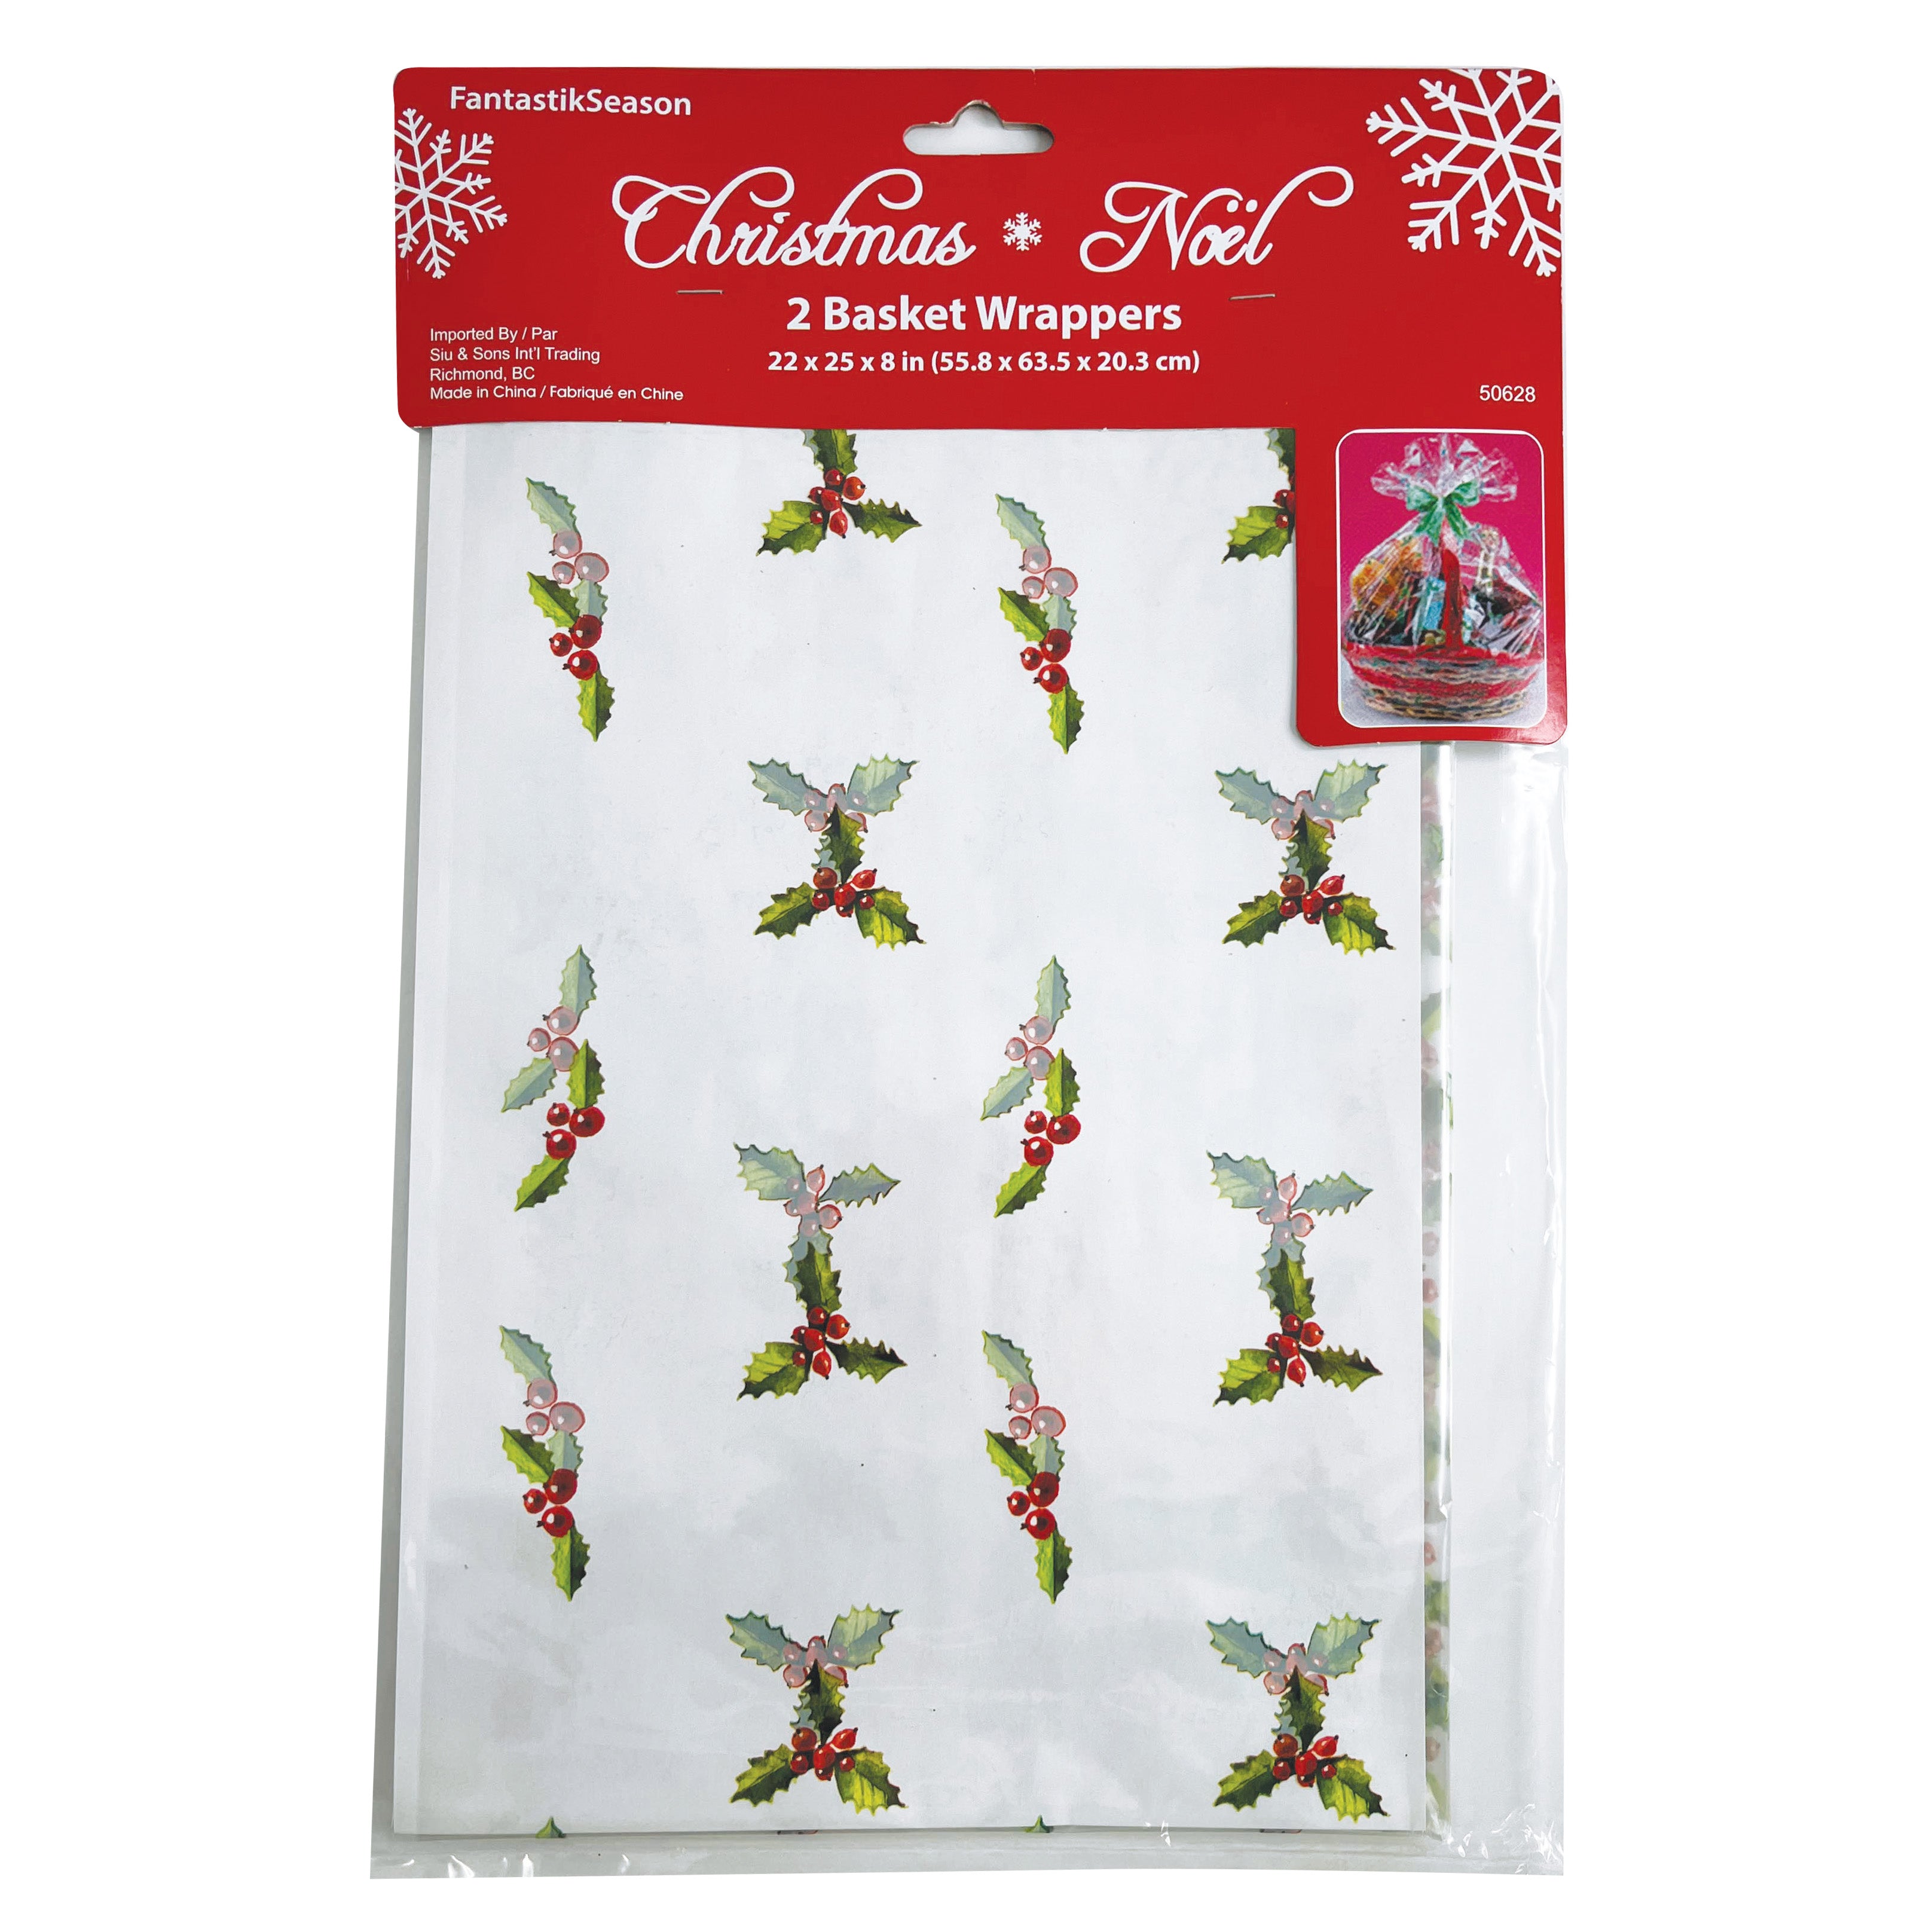 BASKET WRAPPERS Holly Leaves 2pcs